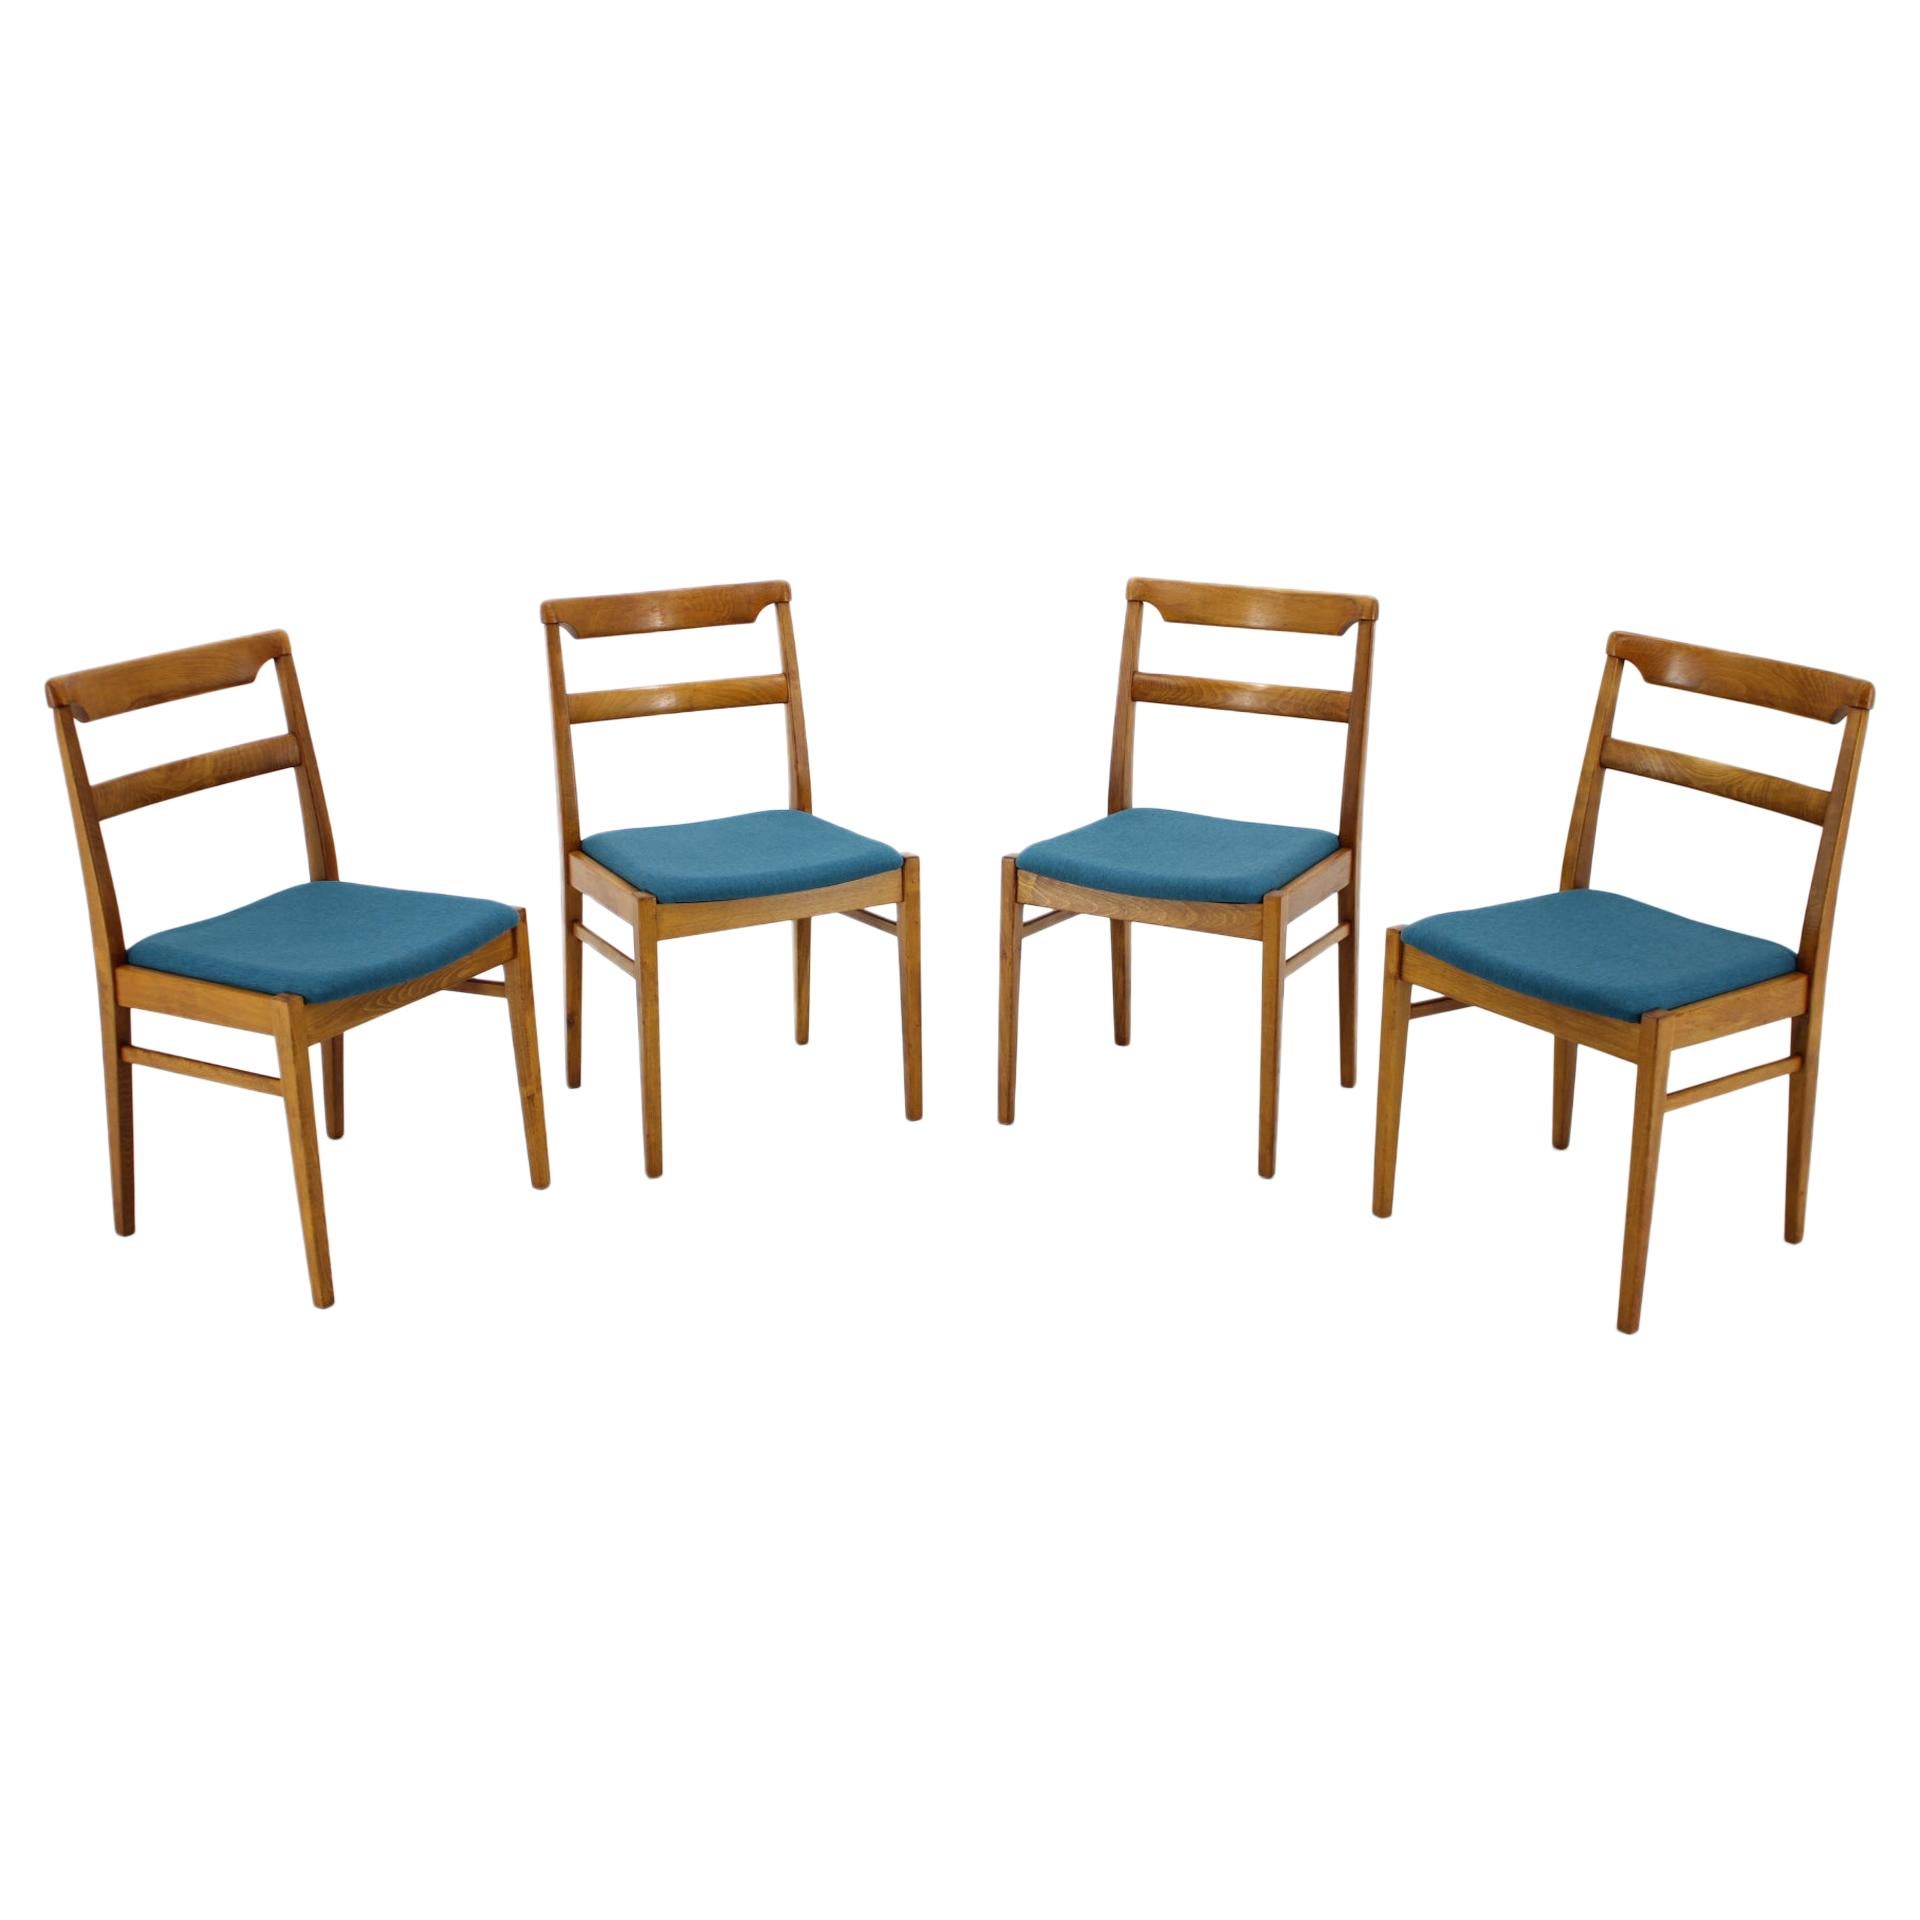 Set of Four Dining Chairs, Czechoslovakia, 1970